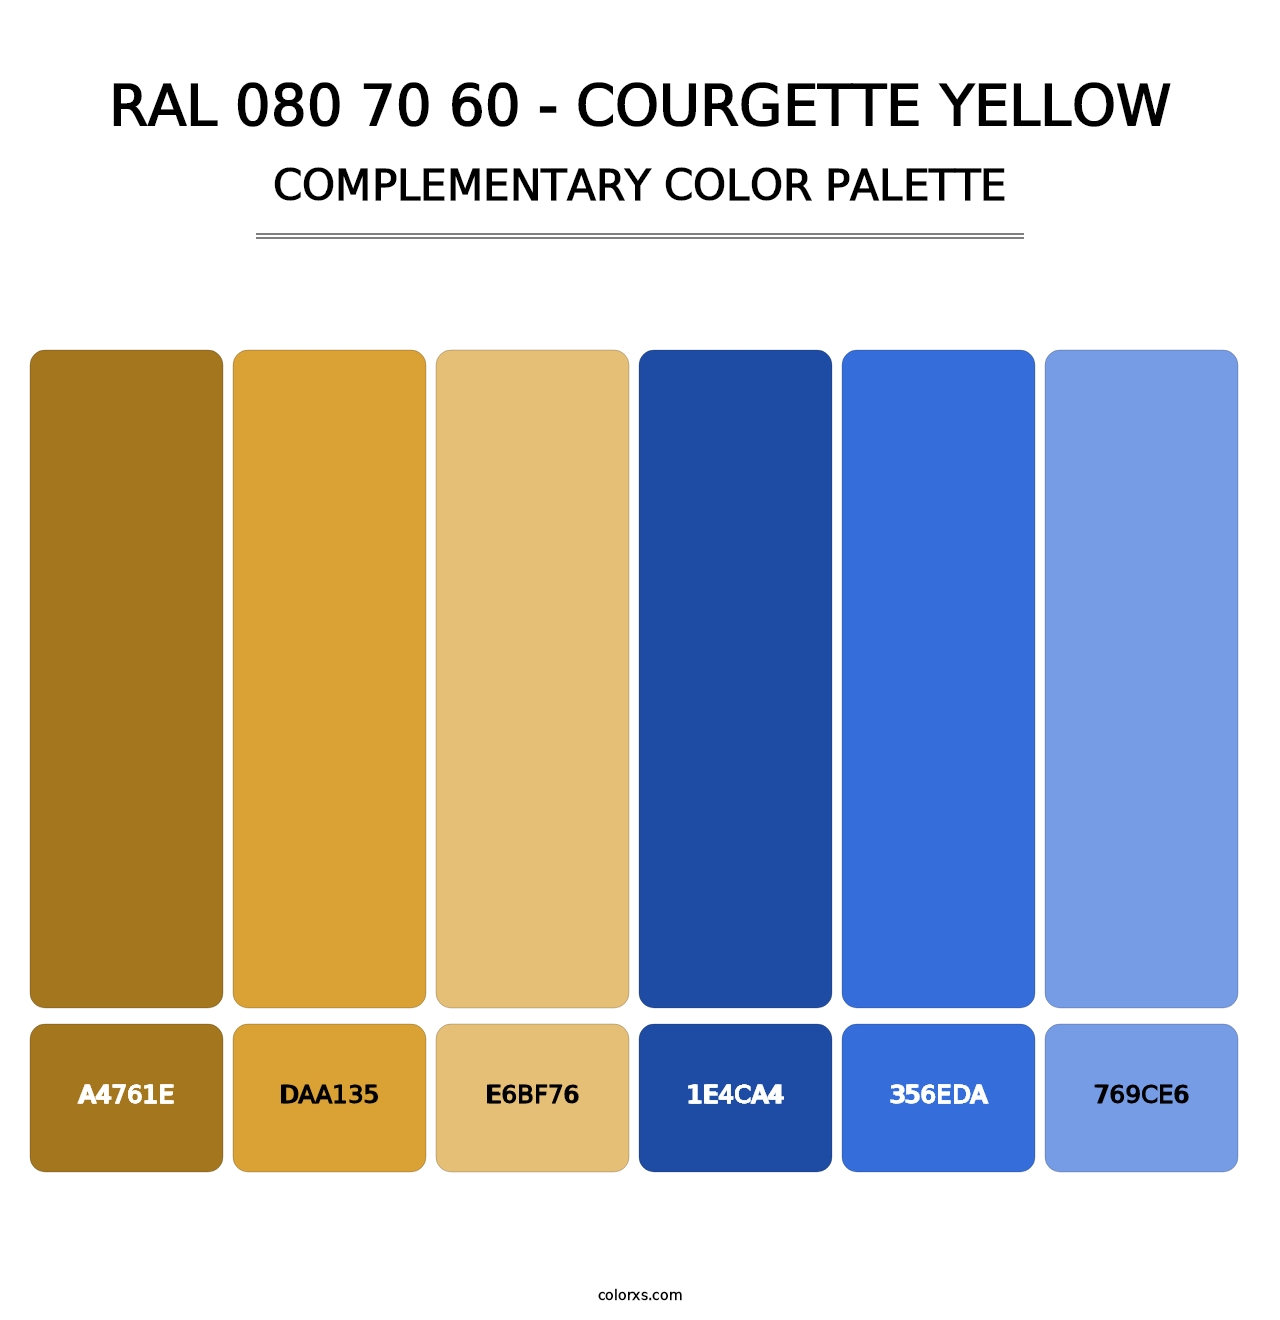 RAL 080 70 60 - Courgette Yellow - Complementary Color Palette